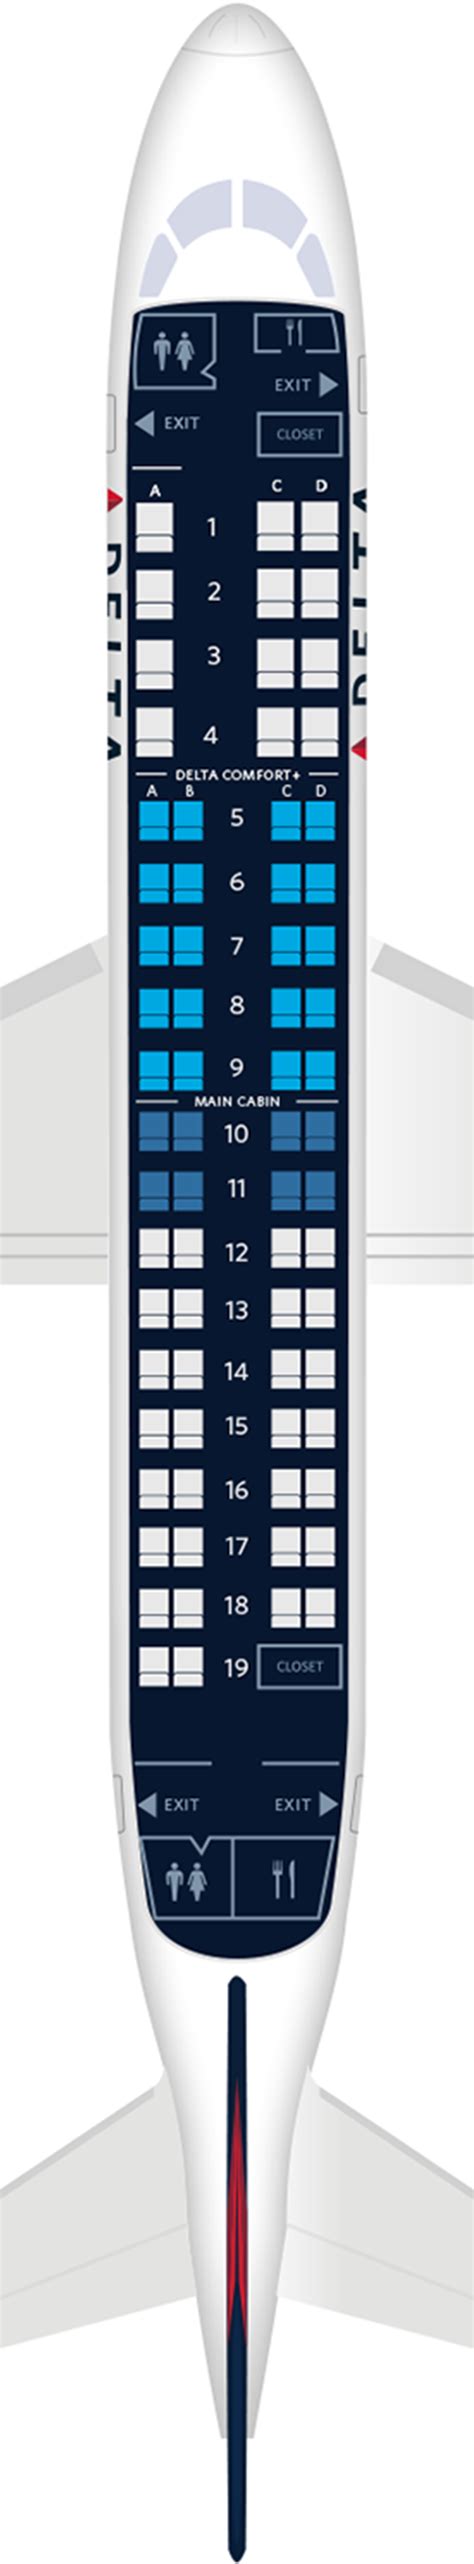 Economy. Seats 88. Pitch 29". Width 18". Recline 3". Travelers aboard KLM's Embraer E175 in economy class can expect a blend of affordability and essential amenities. With a capacity of 60 seats, it offers a selection of entertainment and basic comforts. The crew remains attentive, ensuring a satisfactory flight experience for all.